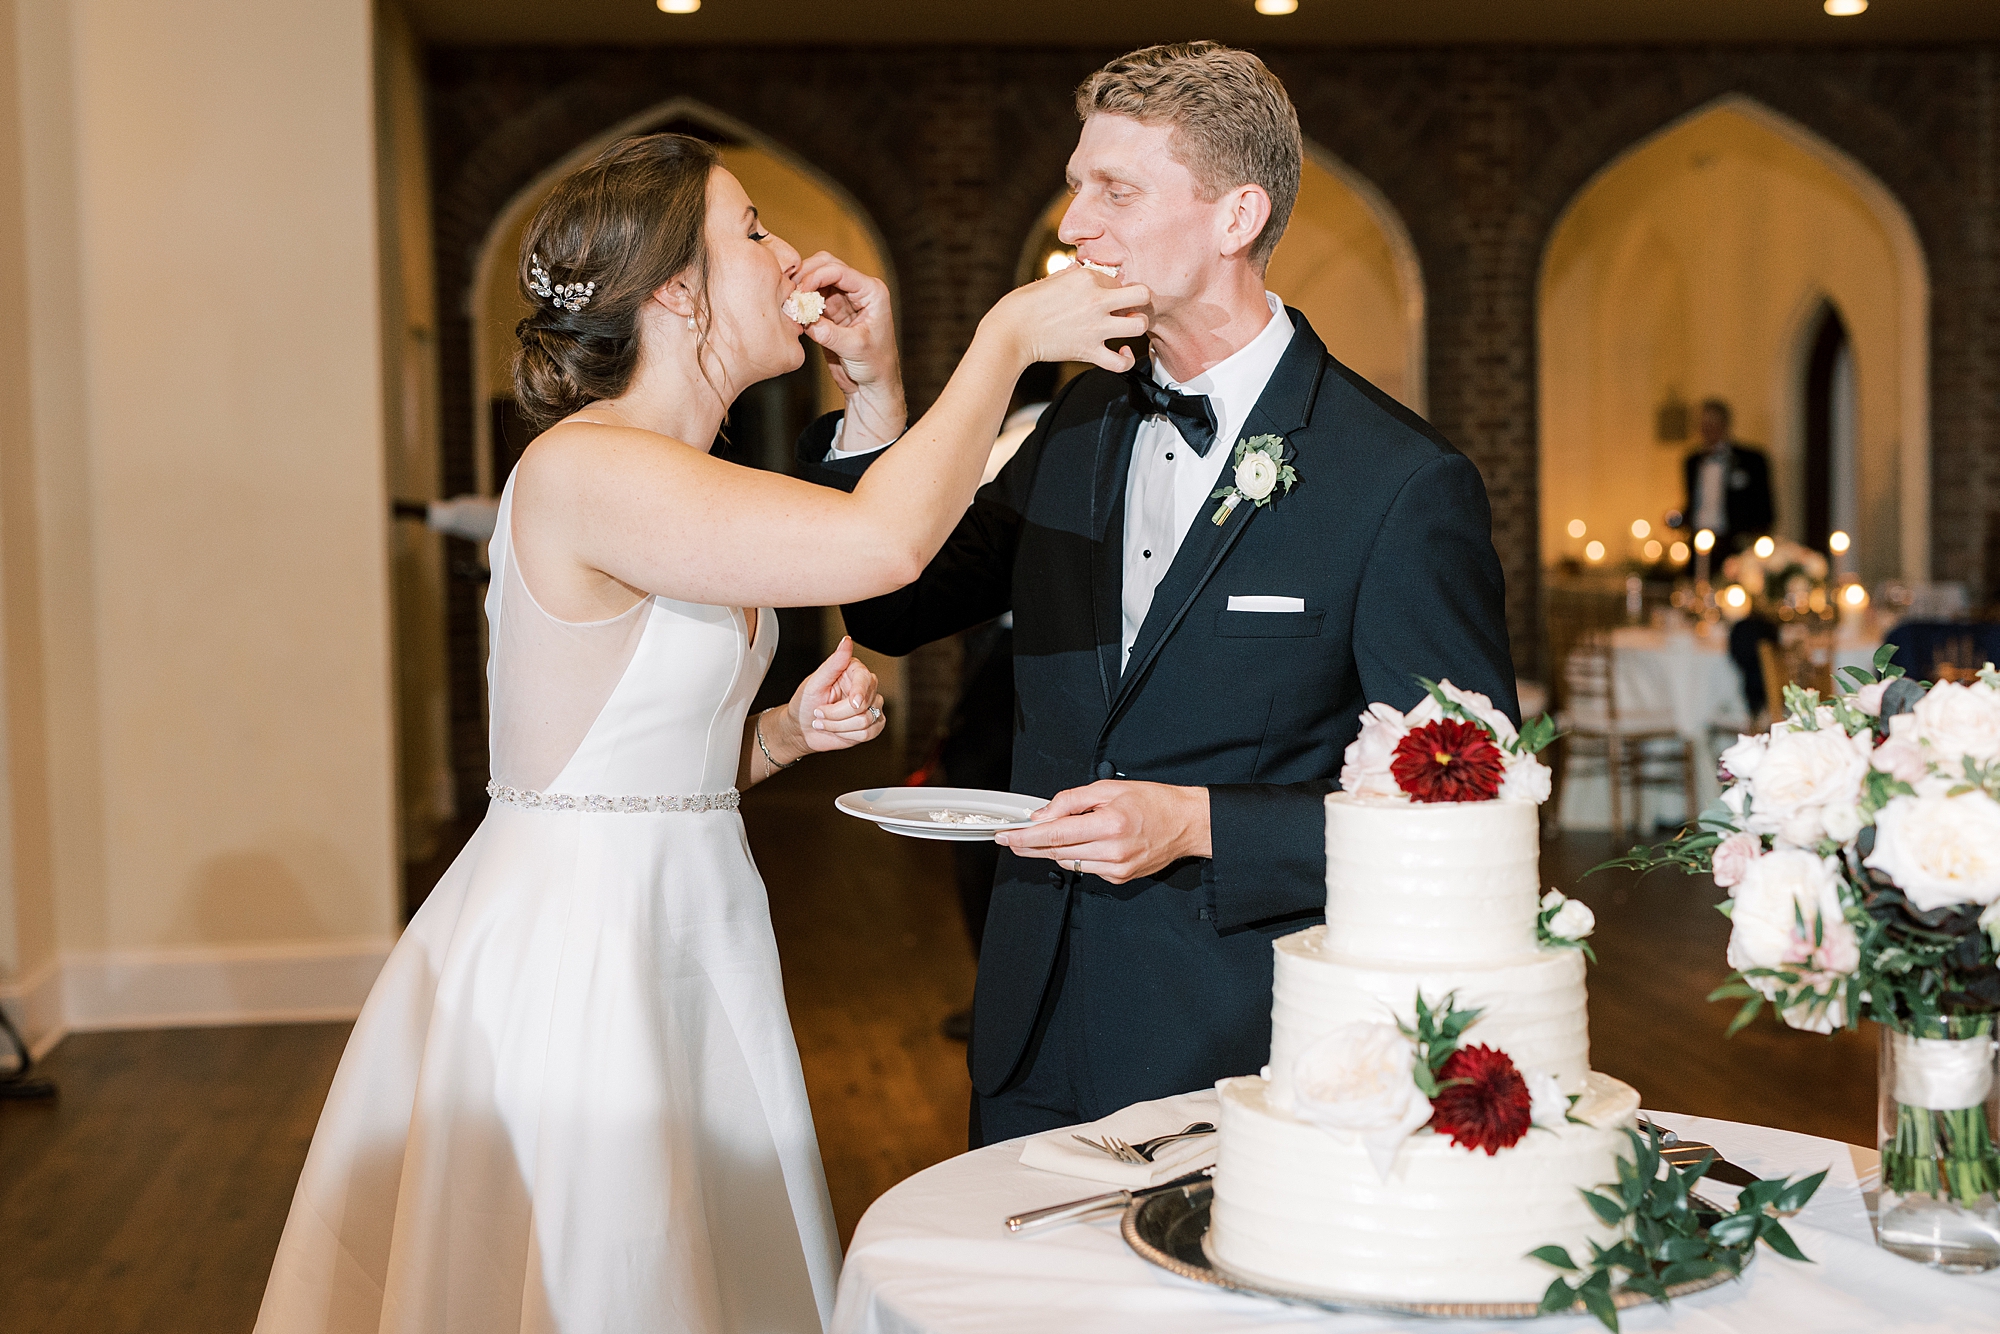 bride and groom feed each other wedding cake during PA wedding reception 